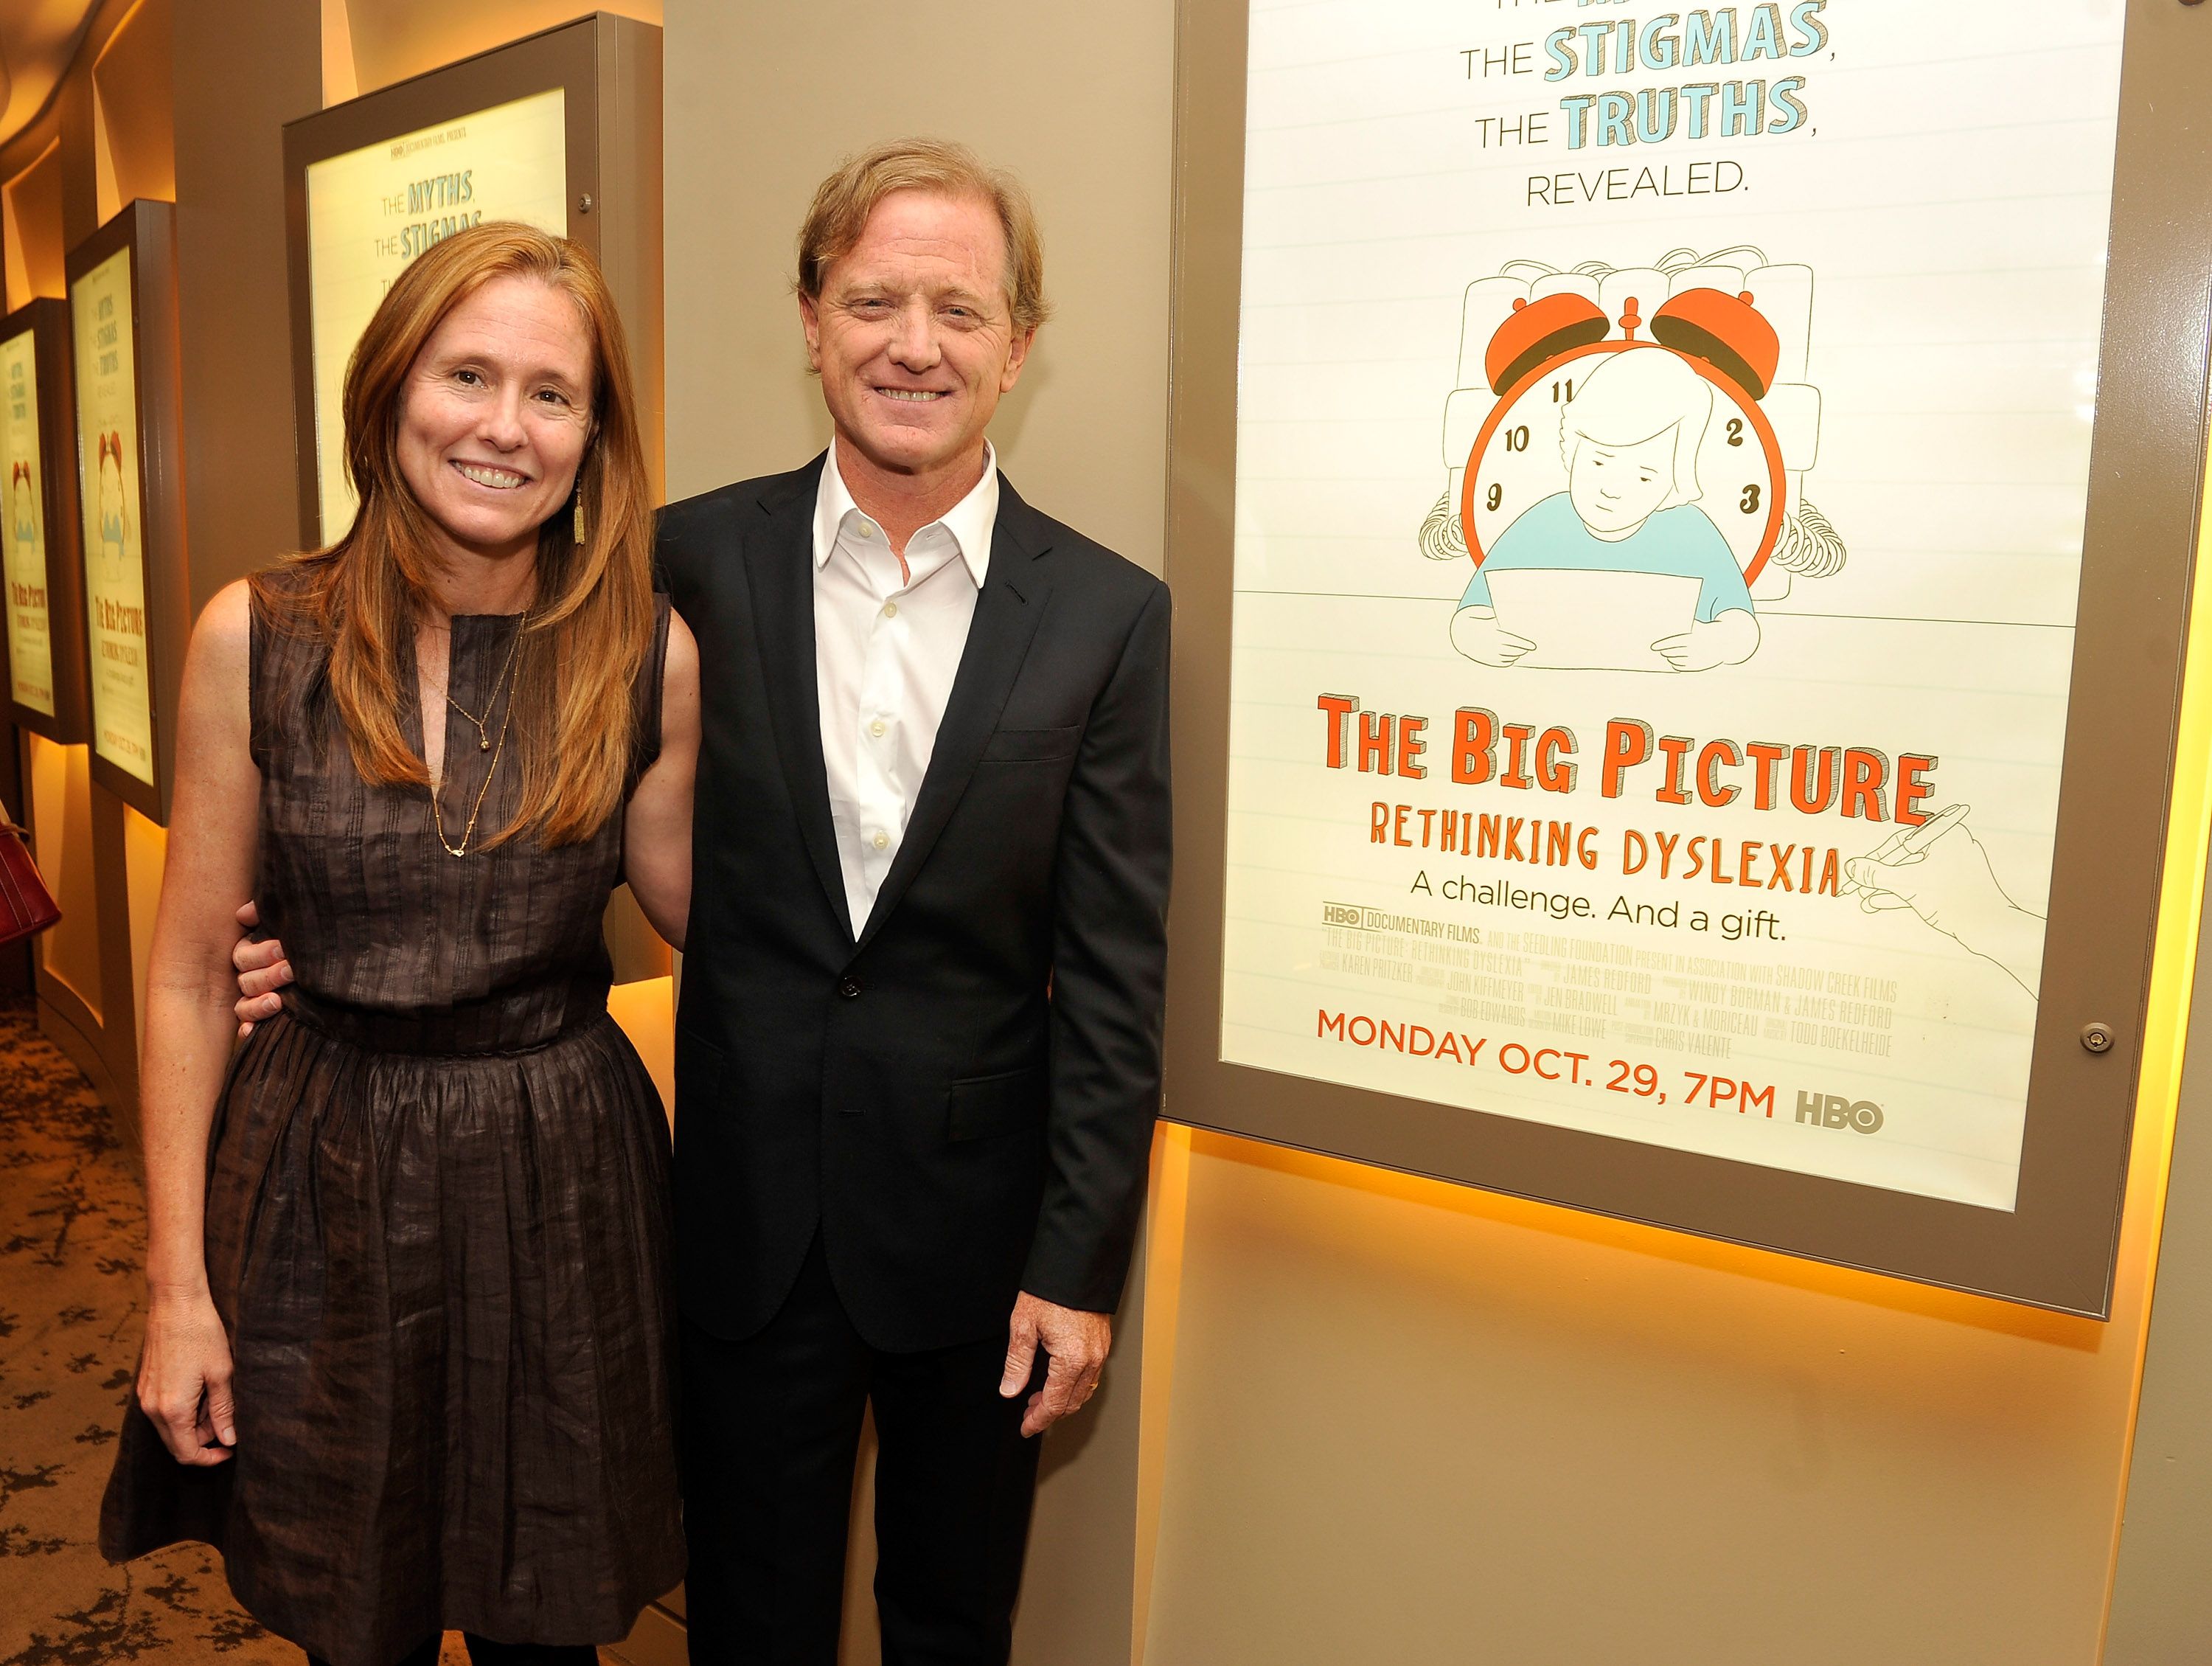 Kyle Redford and director James Redford at HBO's New York Premiere of "The Big Picture: Rethinking Dyslexia" on October 25, 2012 | Photo: Getty Images